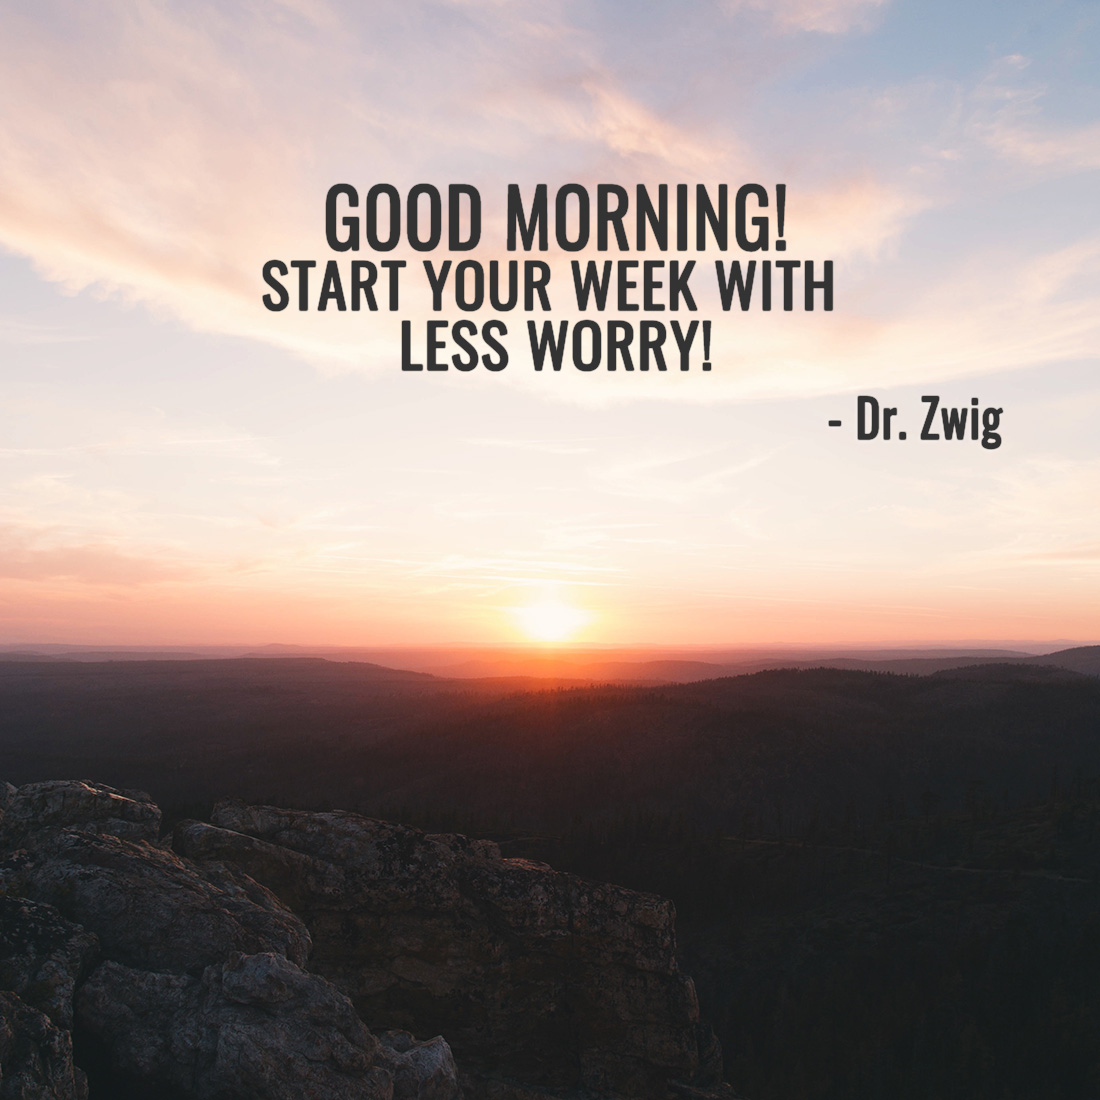 Start your week with less worry!